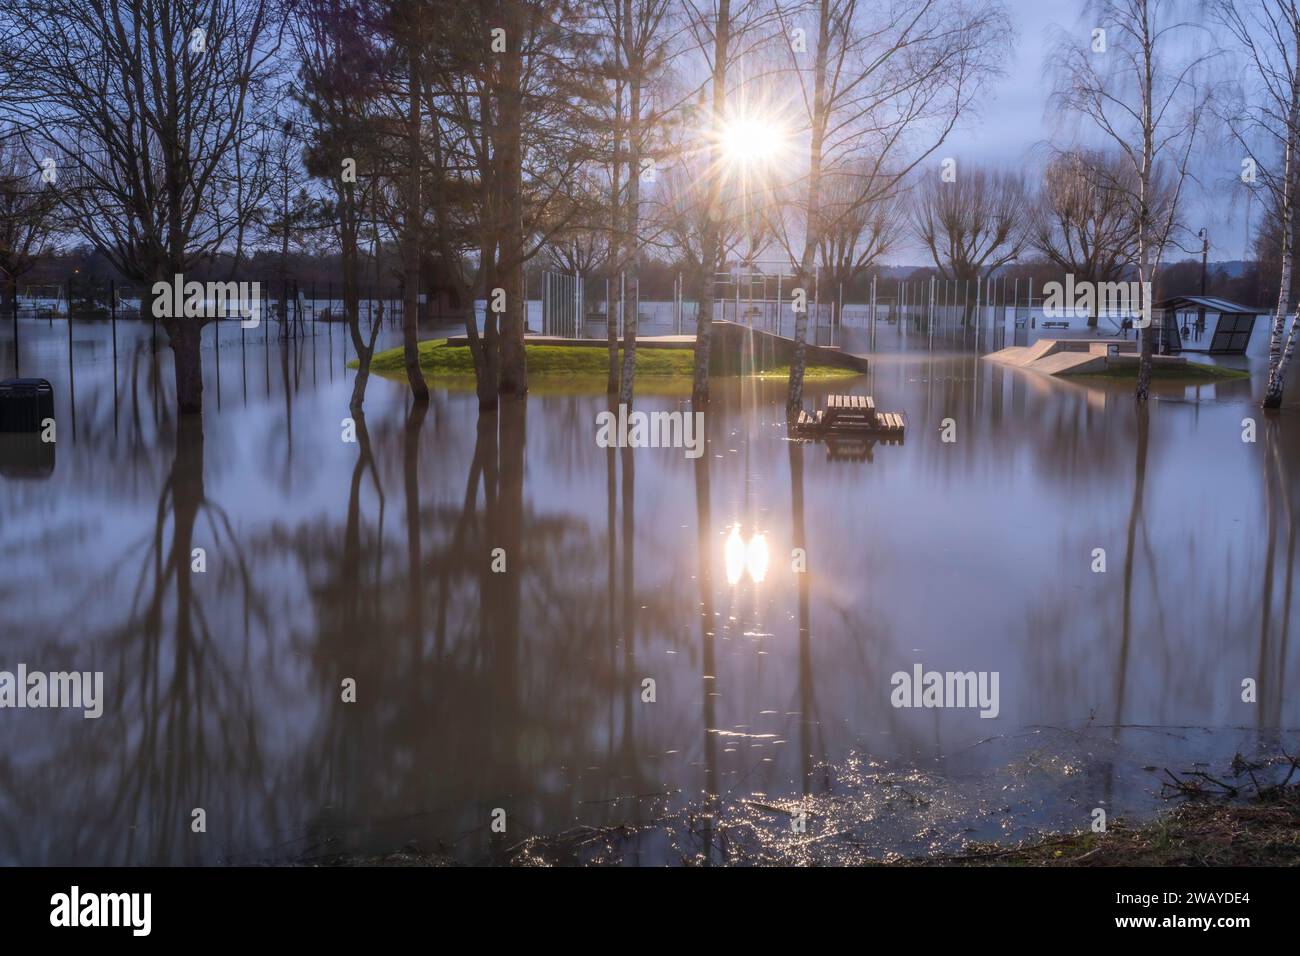 The Sportsground, Tonbridge, Kent, England. 07 January 2024. The market town of Tonbridge has vast areas of flooding on the sportsground, which is a designated floodplain adjacent to the river Medway. ©Sarah Mott / Alamy Live News. Stock Photo